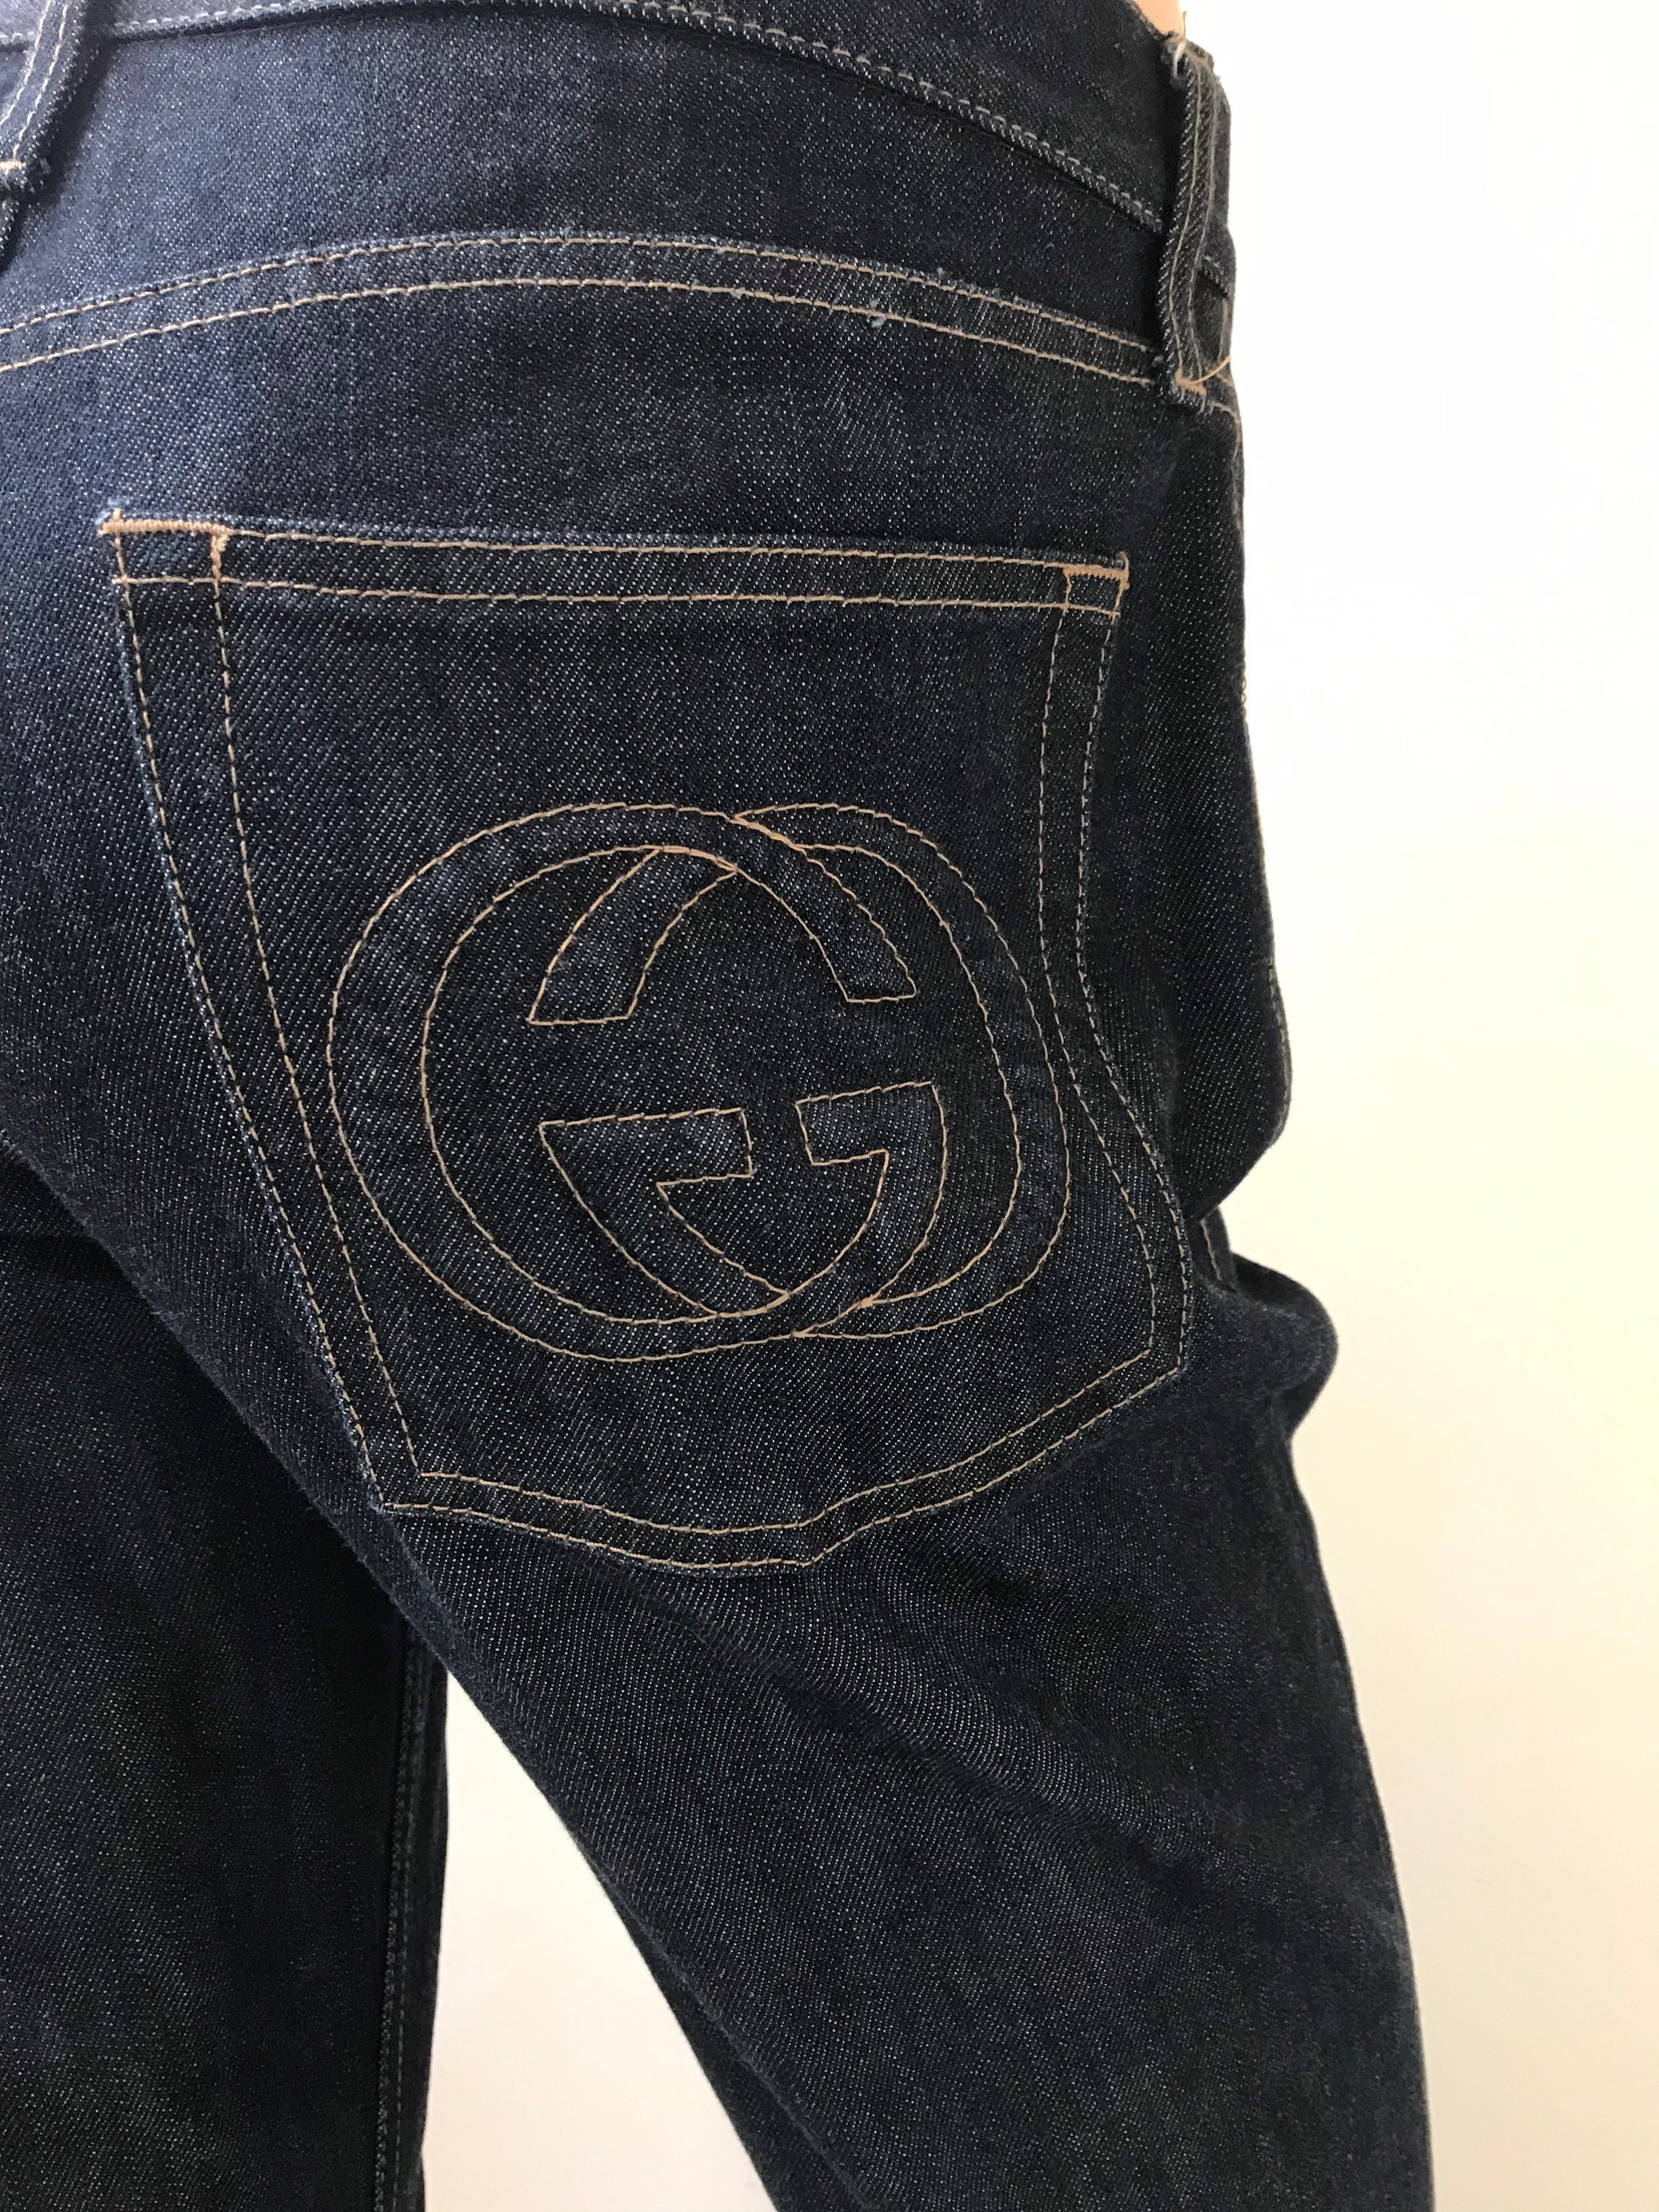 LOUIS VUITTON / Jeans / Authentic Denim / Made in France / -  India